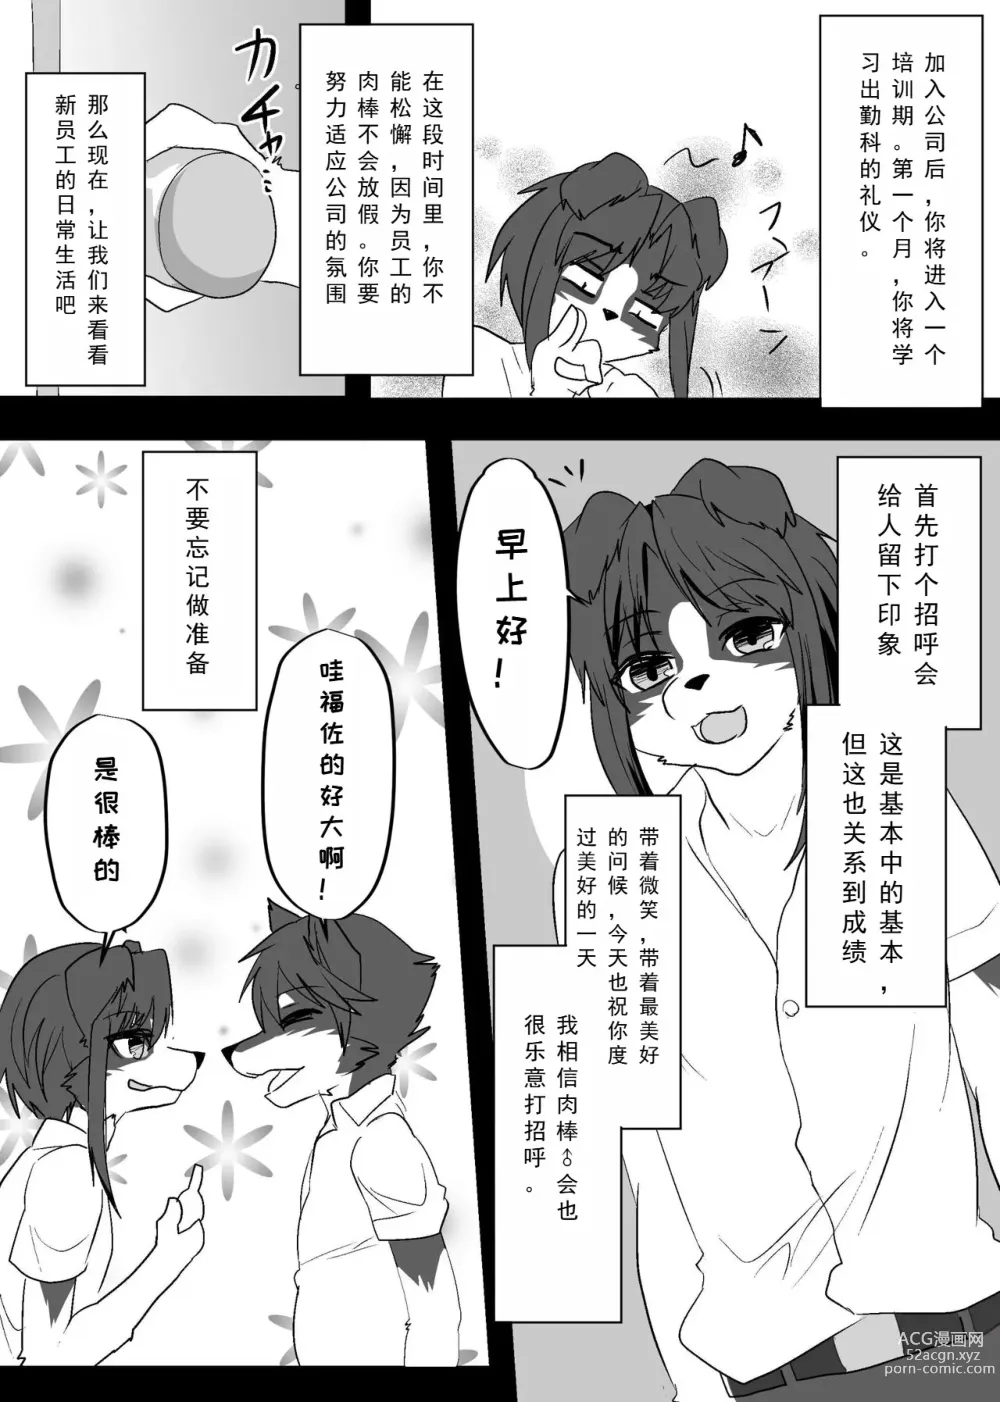 Page 6 of doujinshi 我们发情出勤科 2